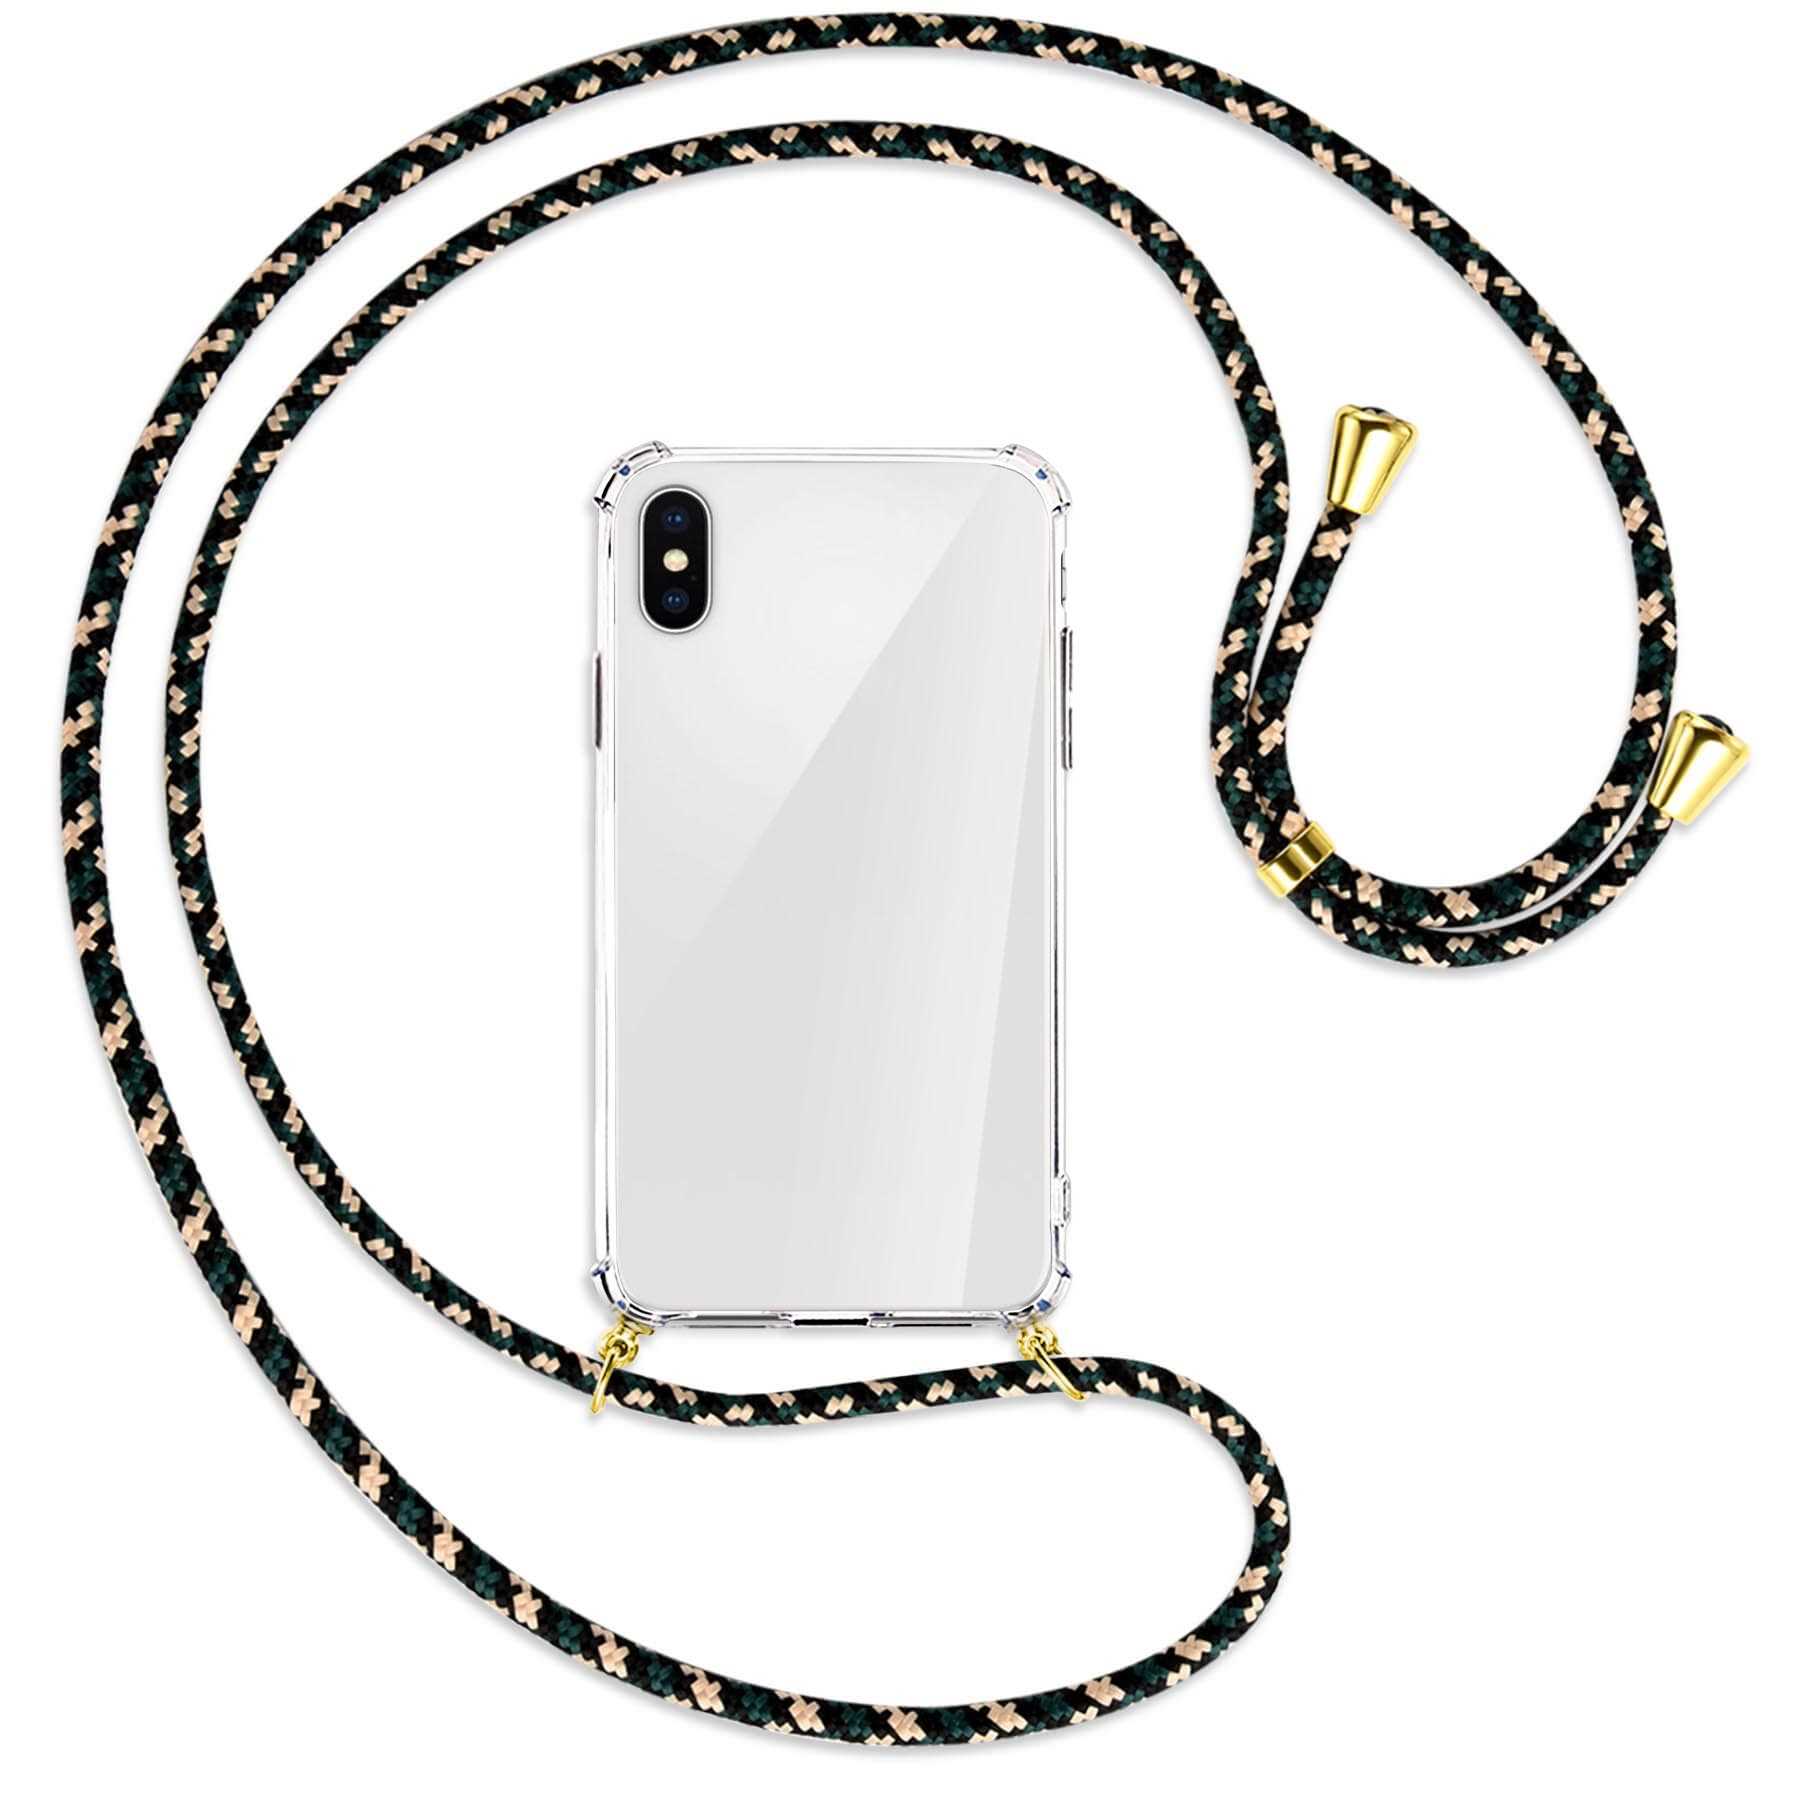 Mobile Phone Chain for Apple iPhone X/XS/10 (5.8") Camouflage | eBay